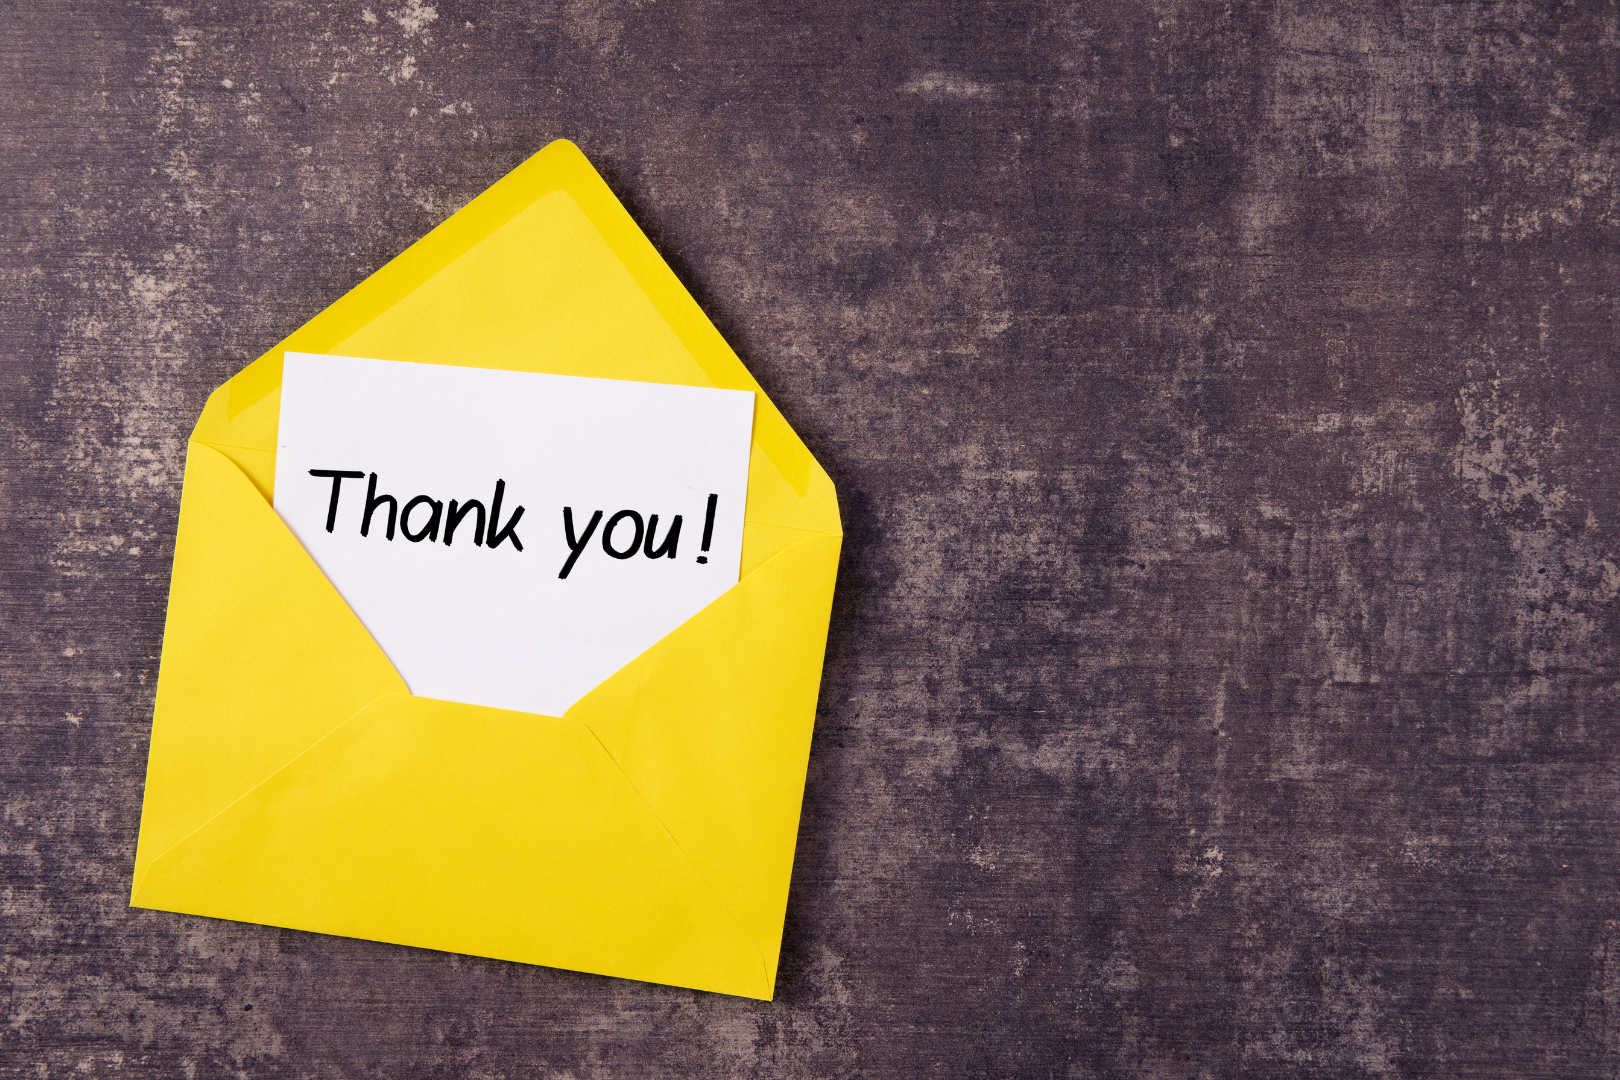 Thank you card messages to make your customers feel cherished